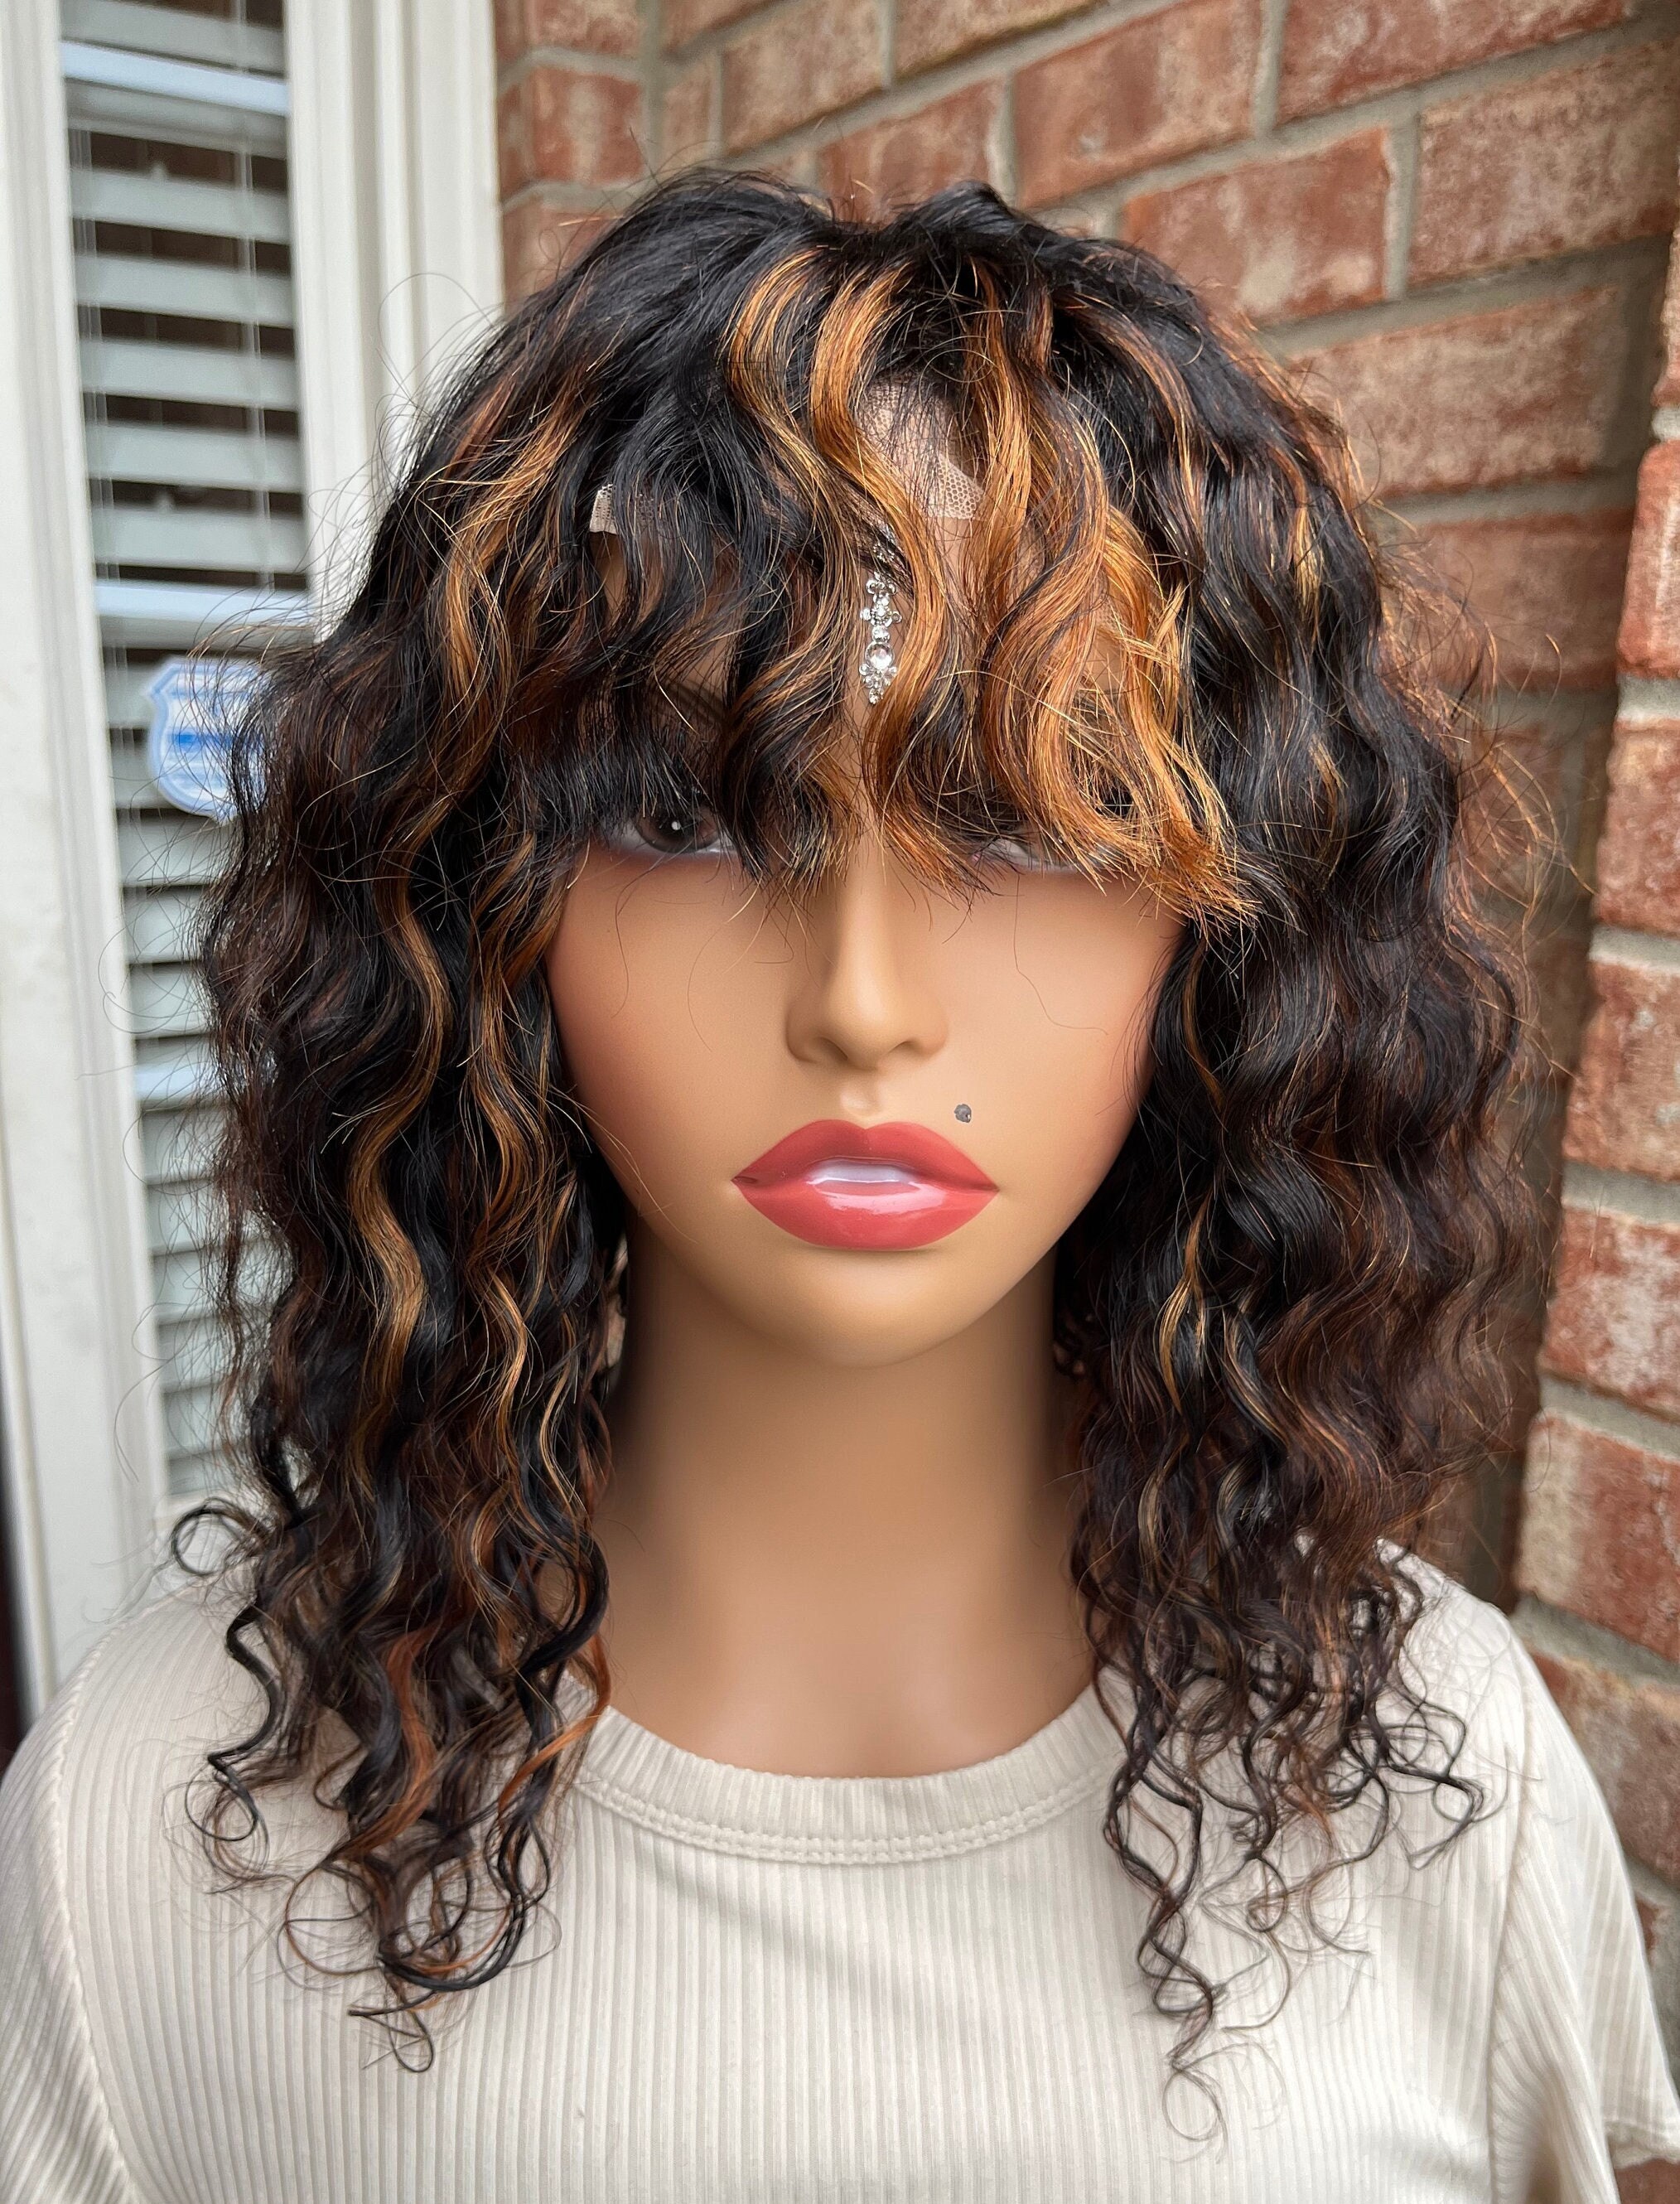 Cosmetology Mannequin Head Hair Styling Hairdresser Training Human